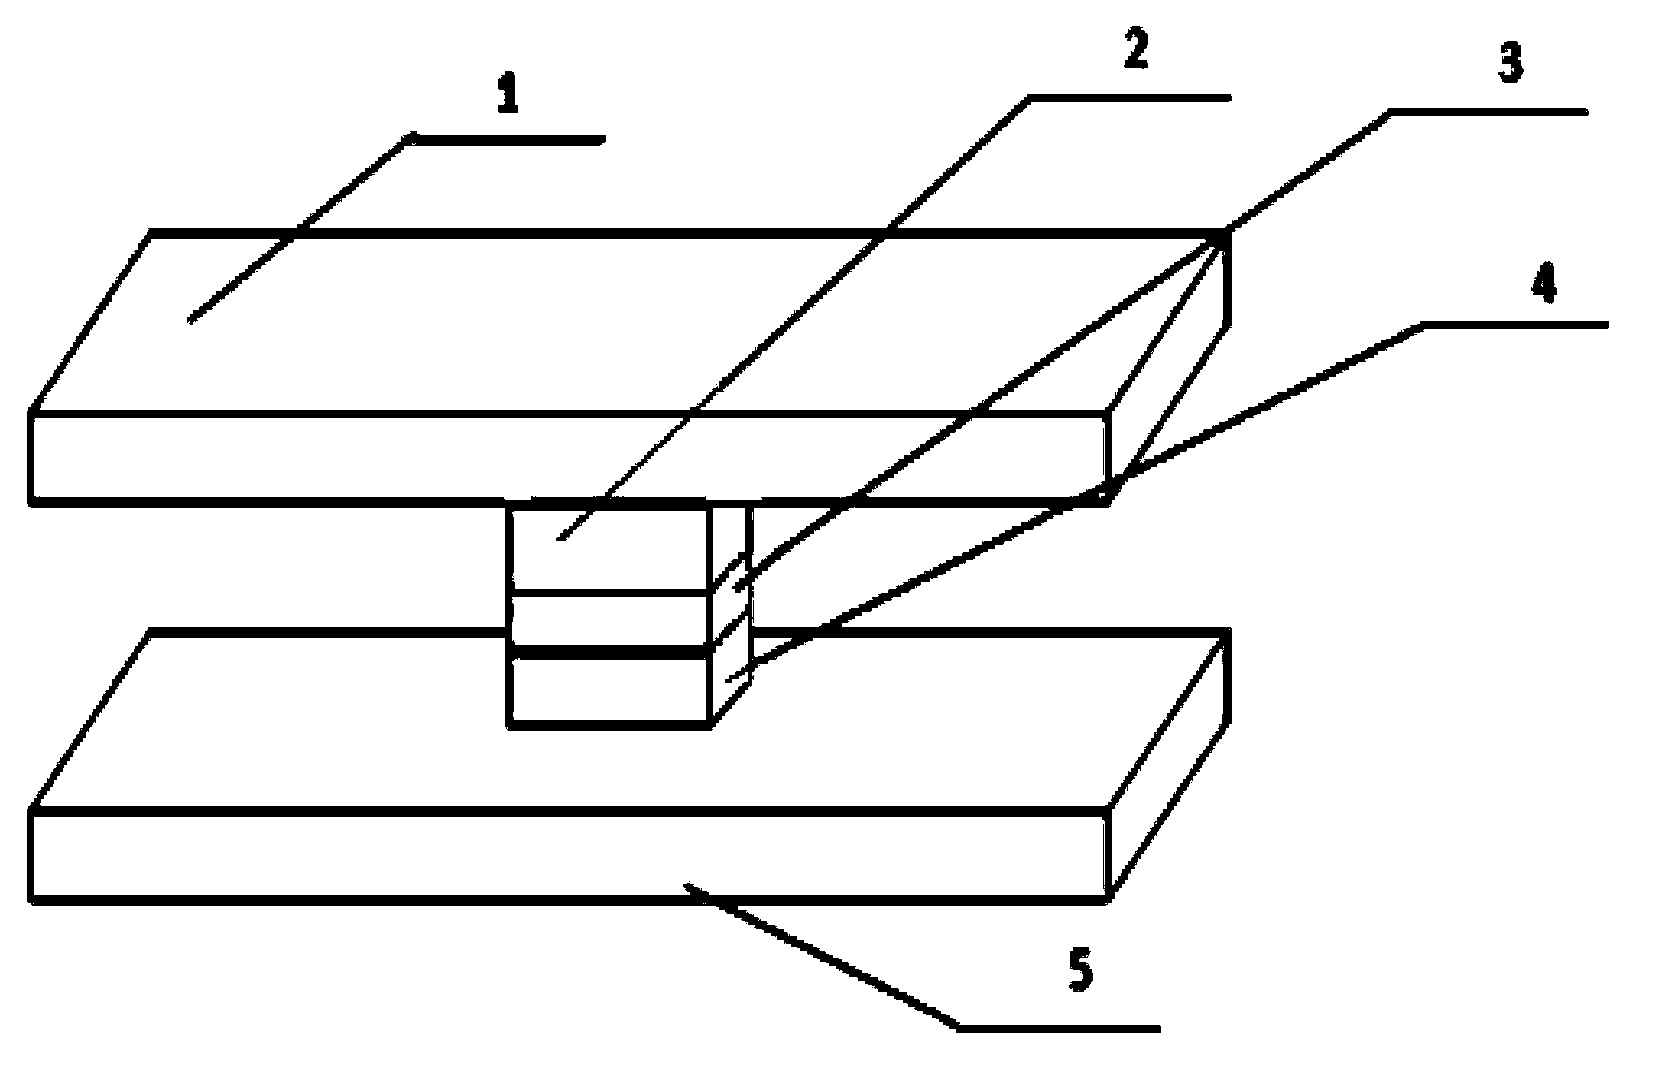 Method for connecting glass with copper or copper alloy